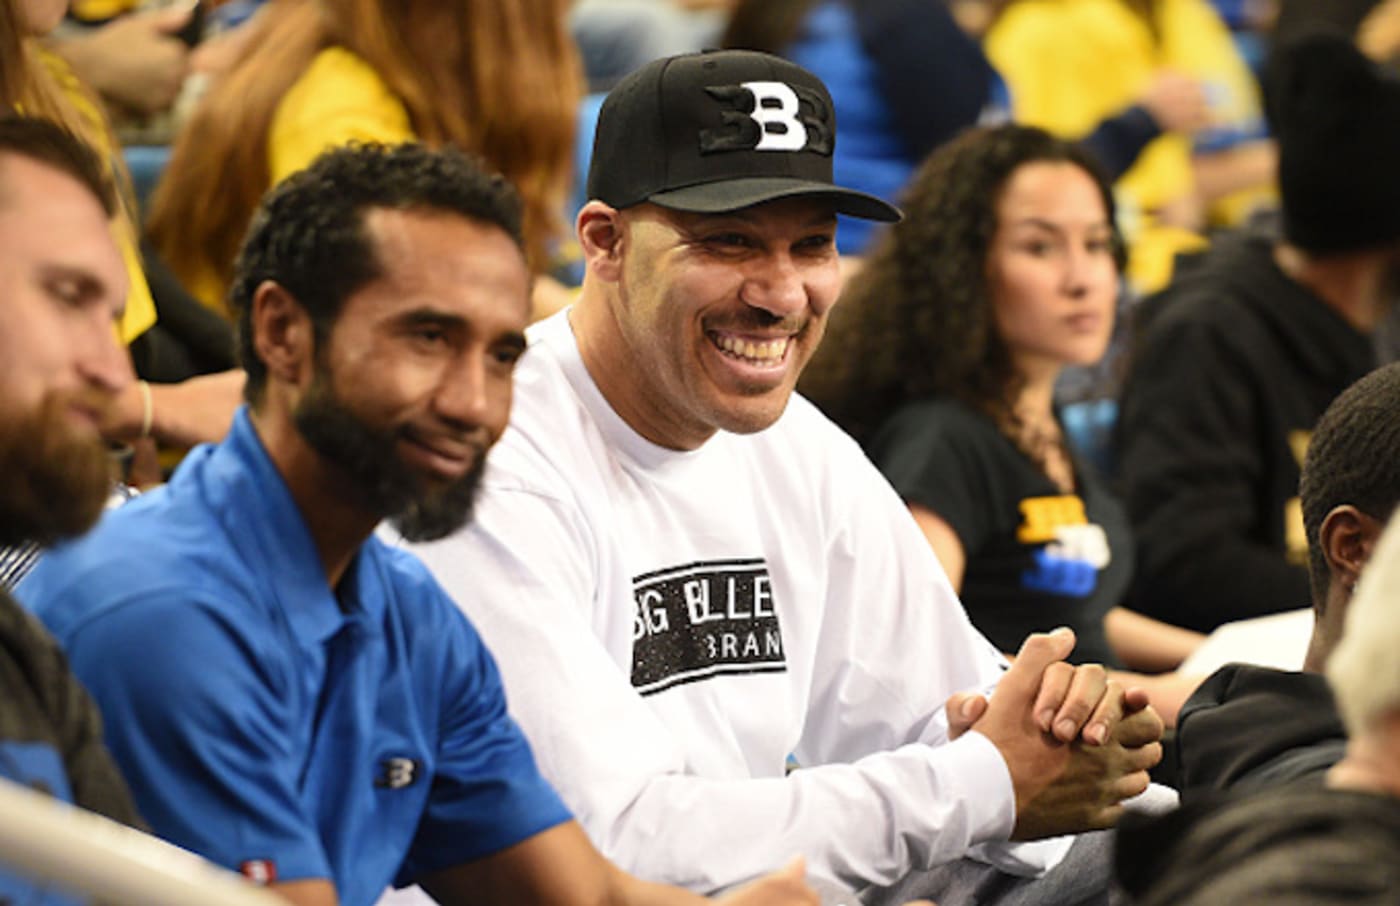 LaVar Ball looks on during a college basketball game